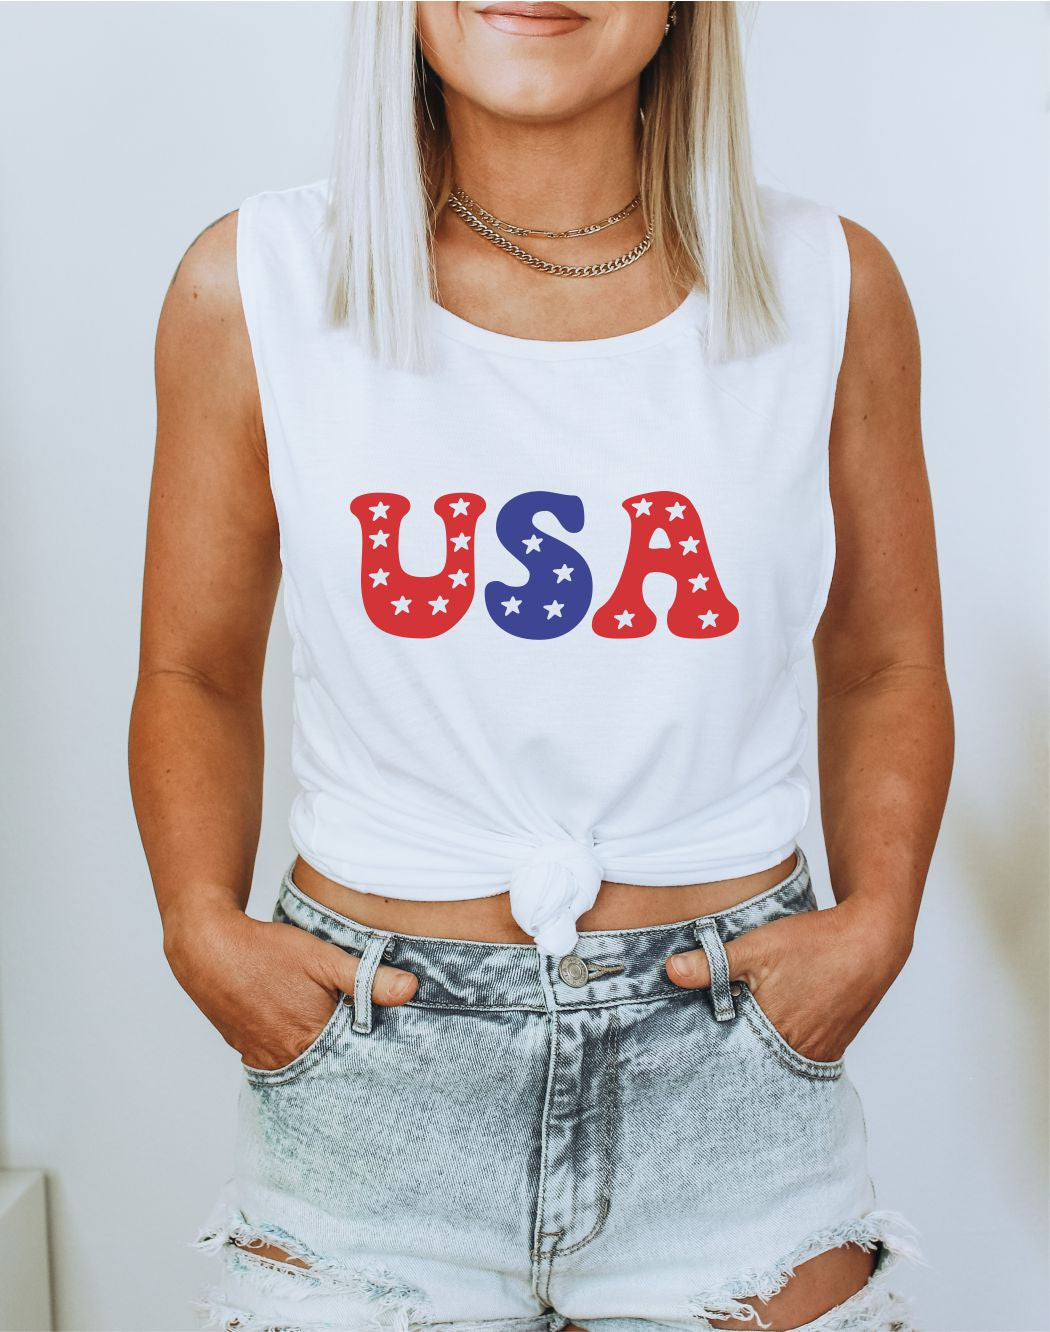 USA July 4th Patriotic Graphic Muscle Tank Top